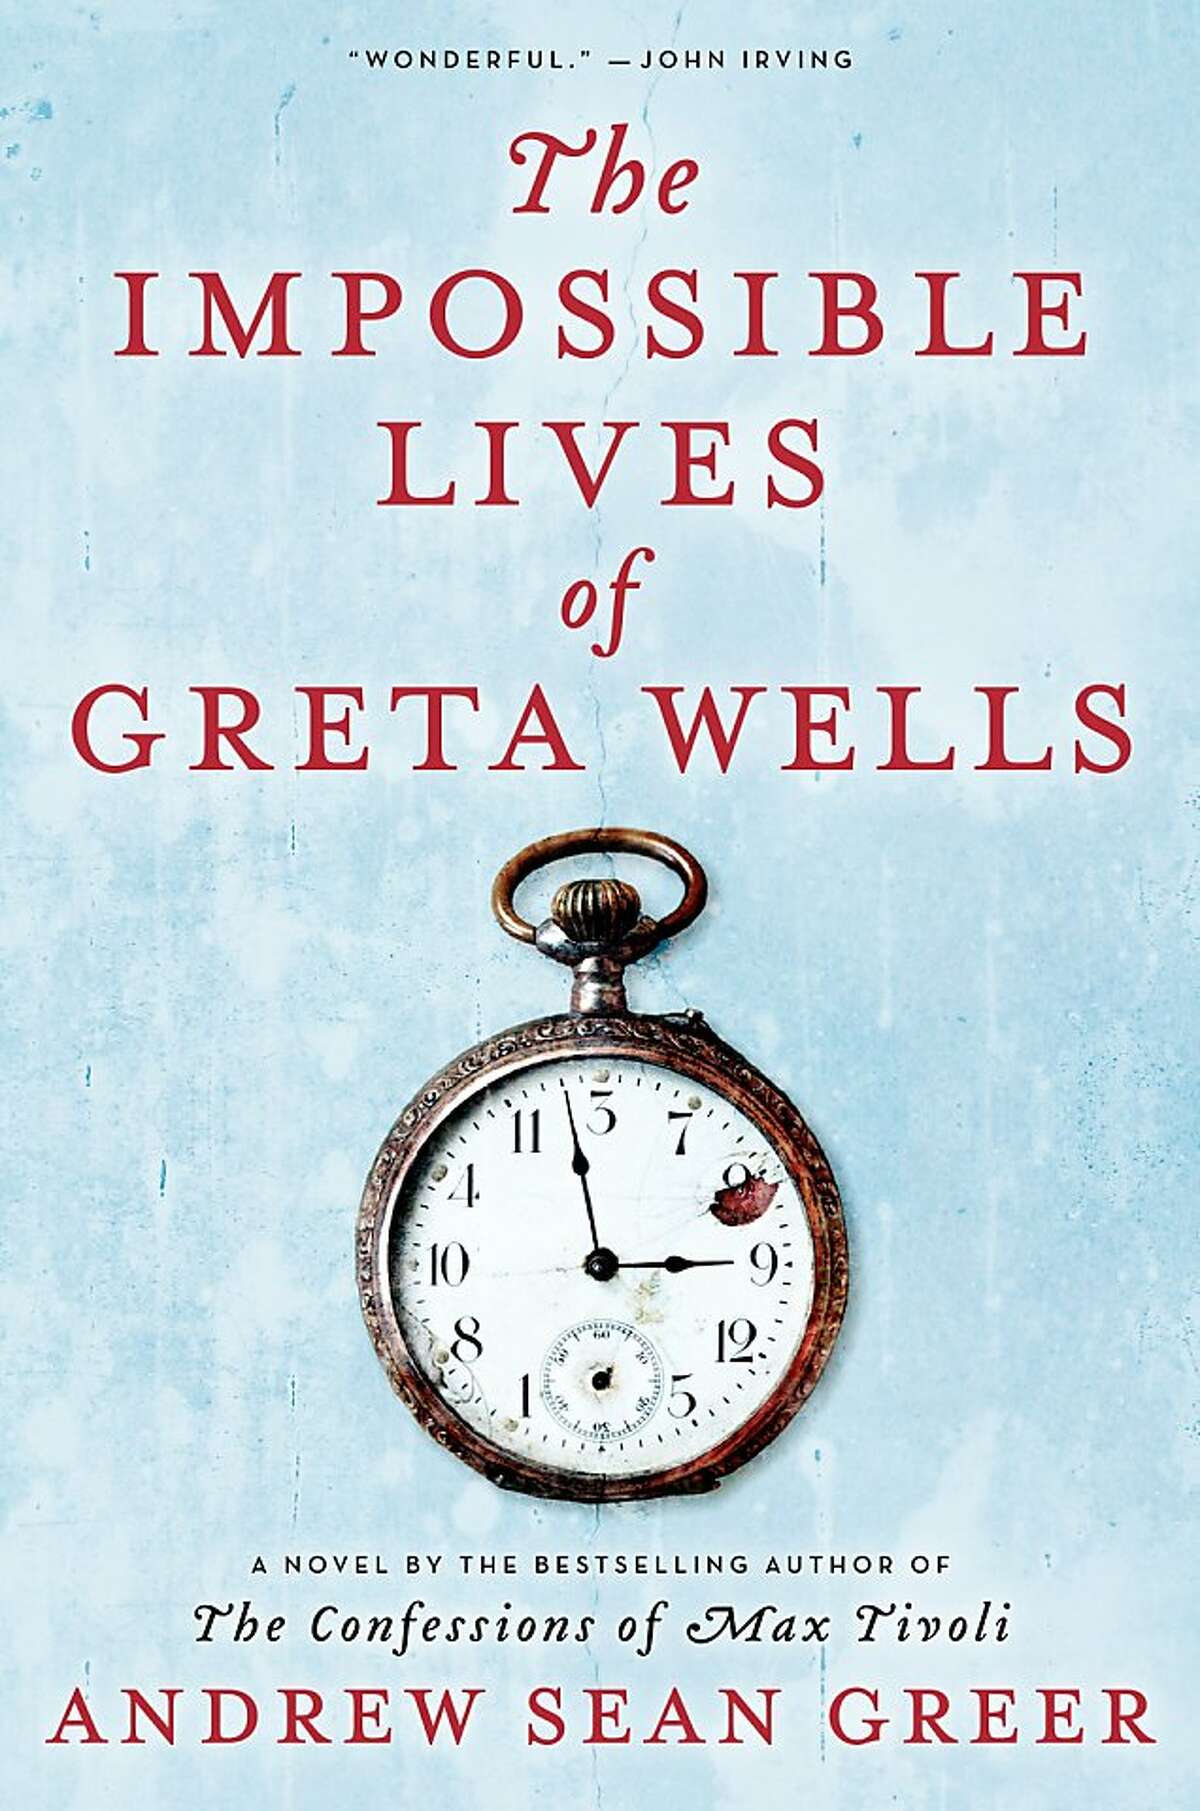 The Impossible Lives of Greta Wells, by Andrew Sean Greer